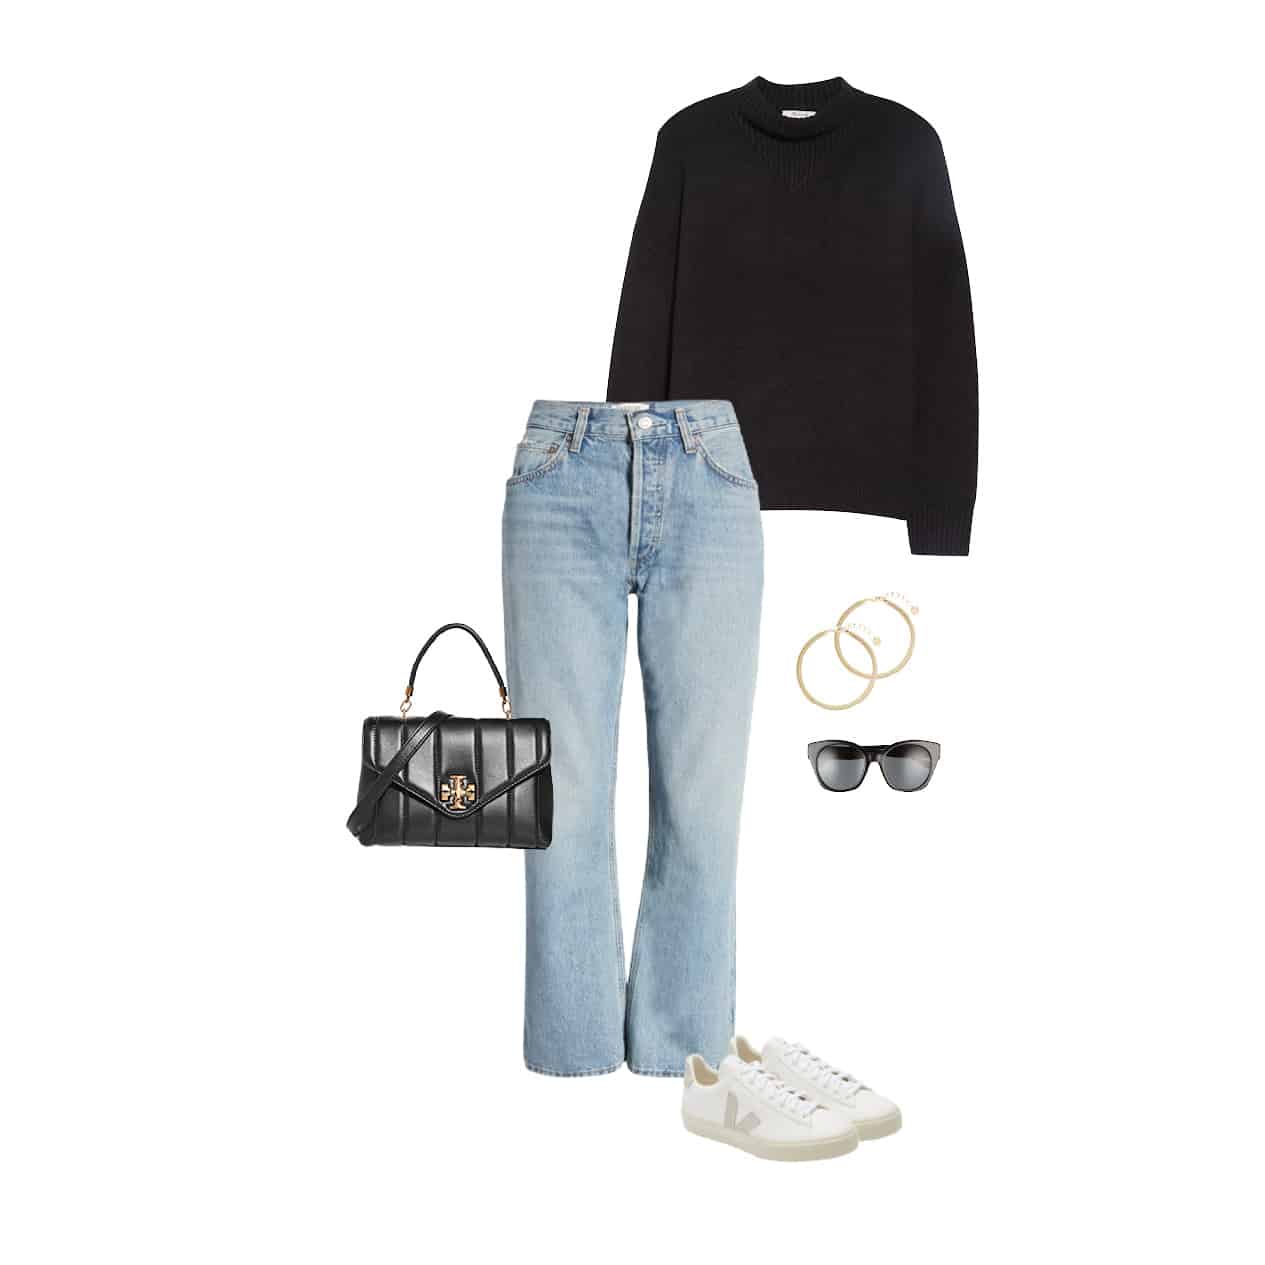 Outfit graphic with a black sweater, straight leg jeans, gold hoop earrings, black sunglasses, veja sneakers, and a black Tory Burch handbag.